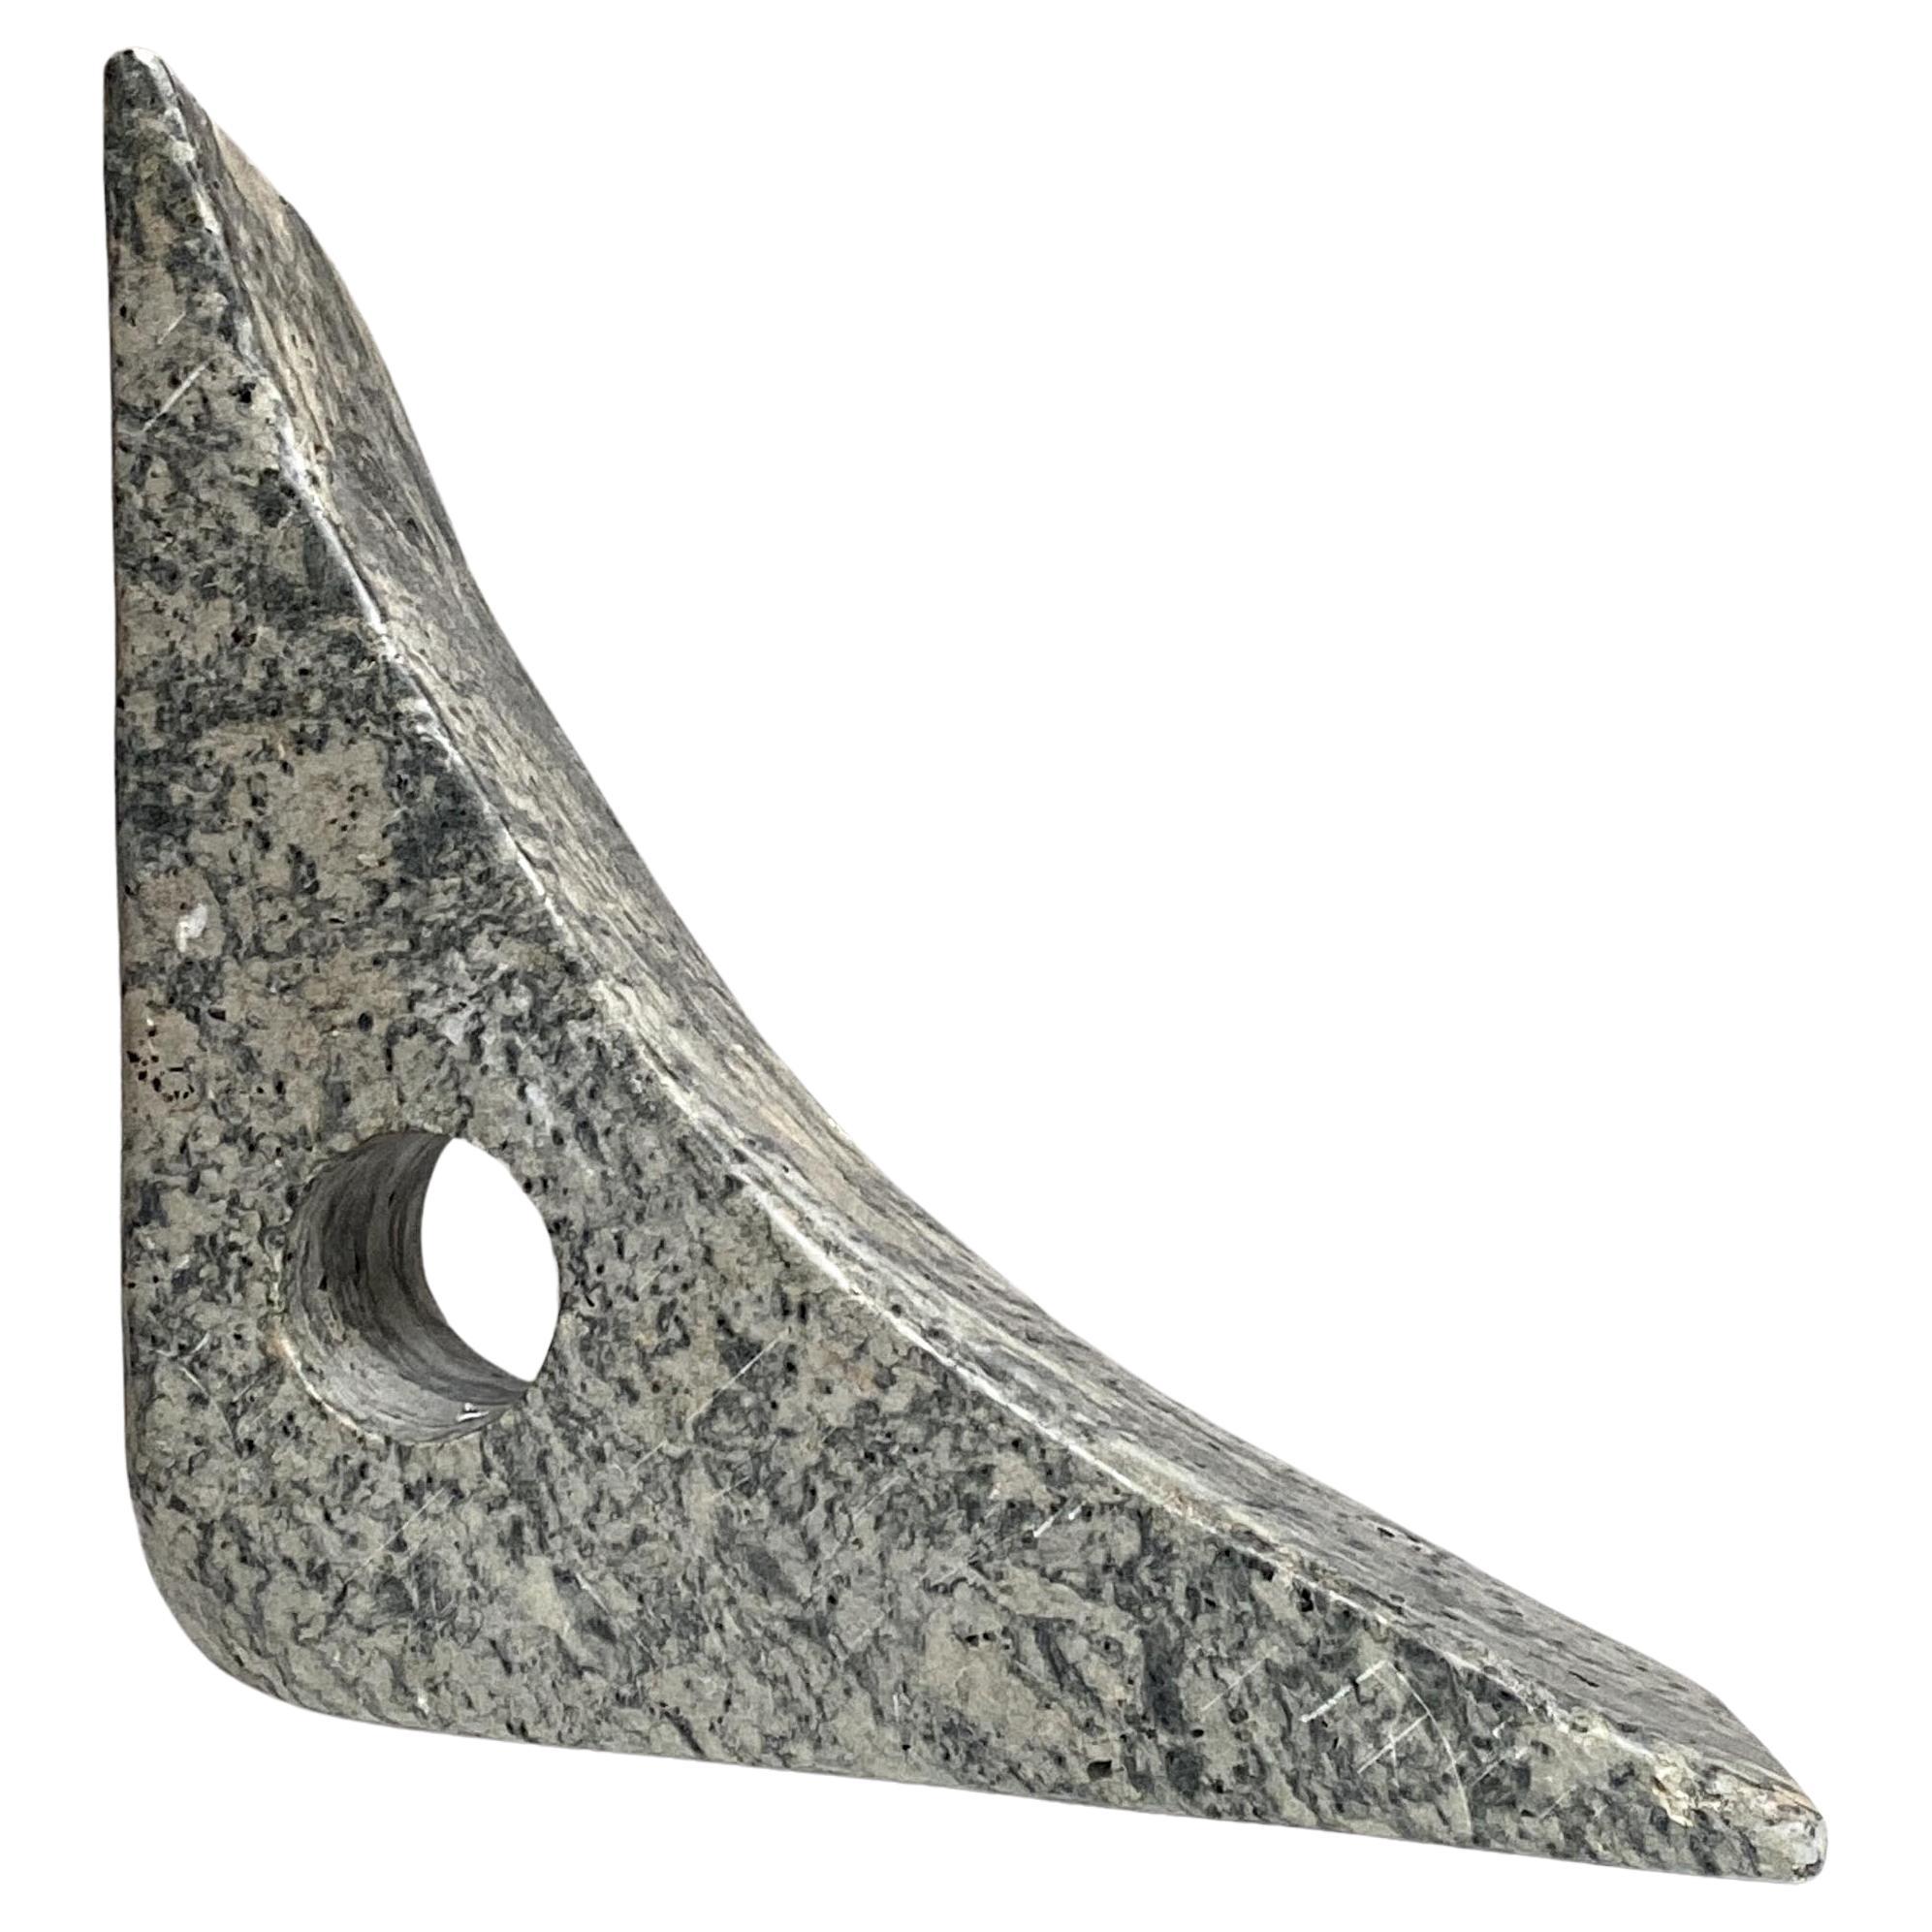 Modernist Stone Sculpture in Abstract Triangle Shape, 1960s, Noguchi Style